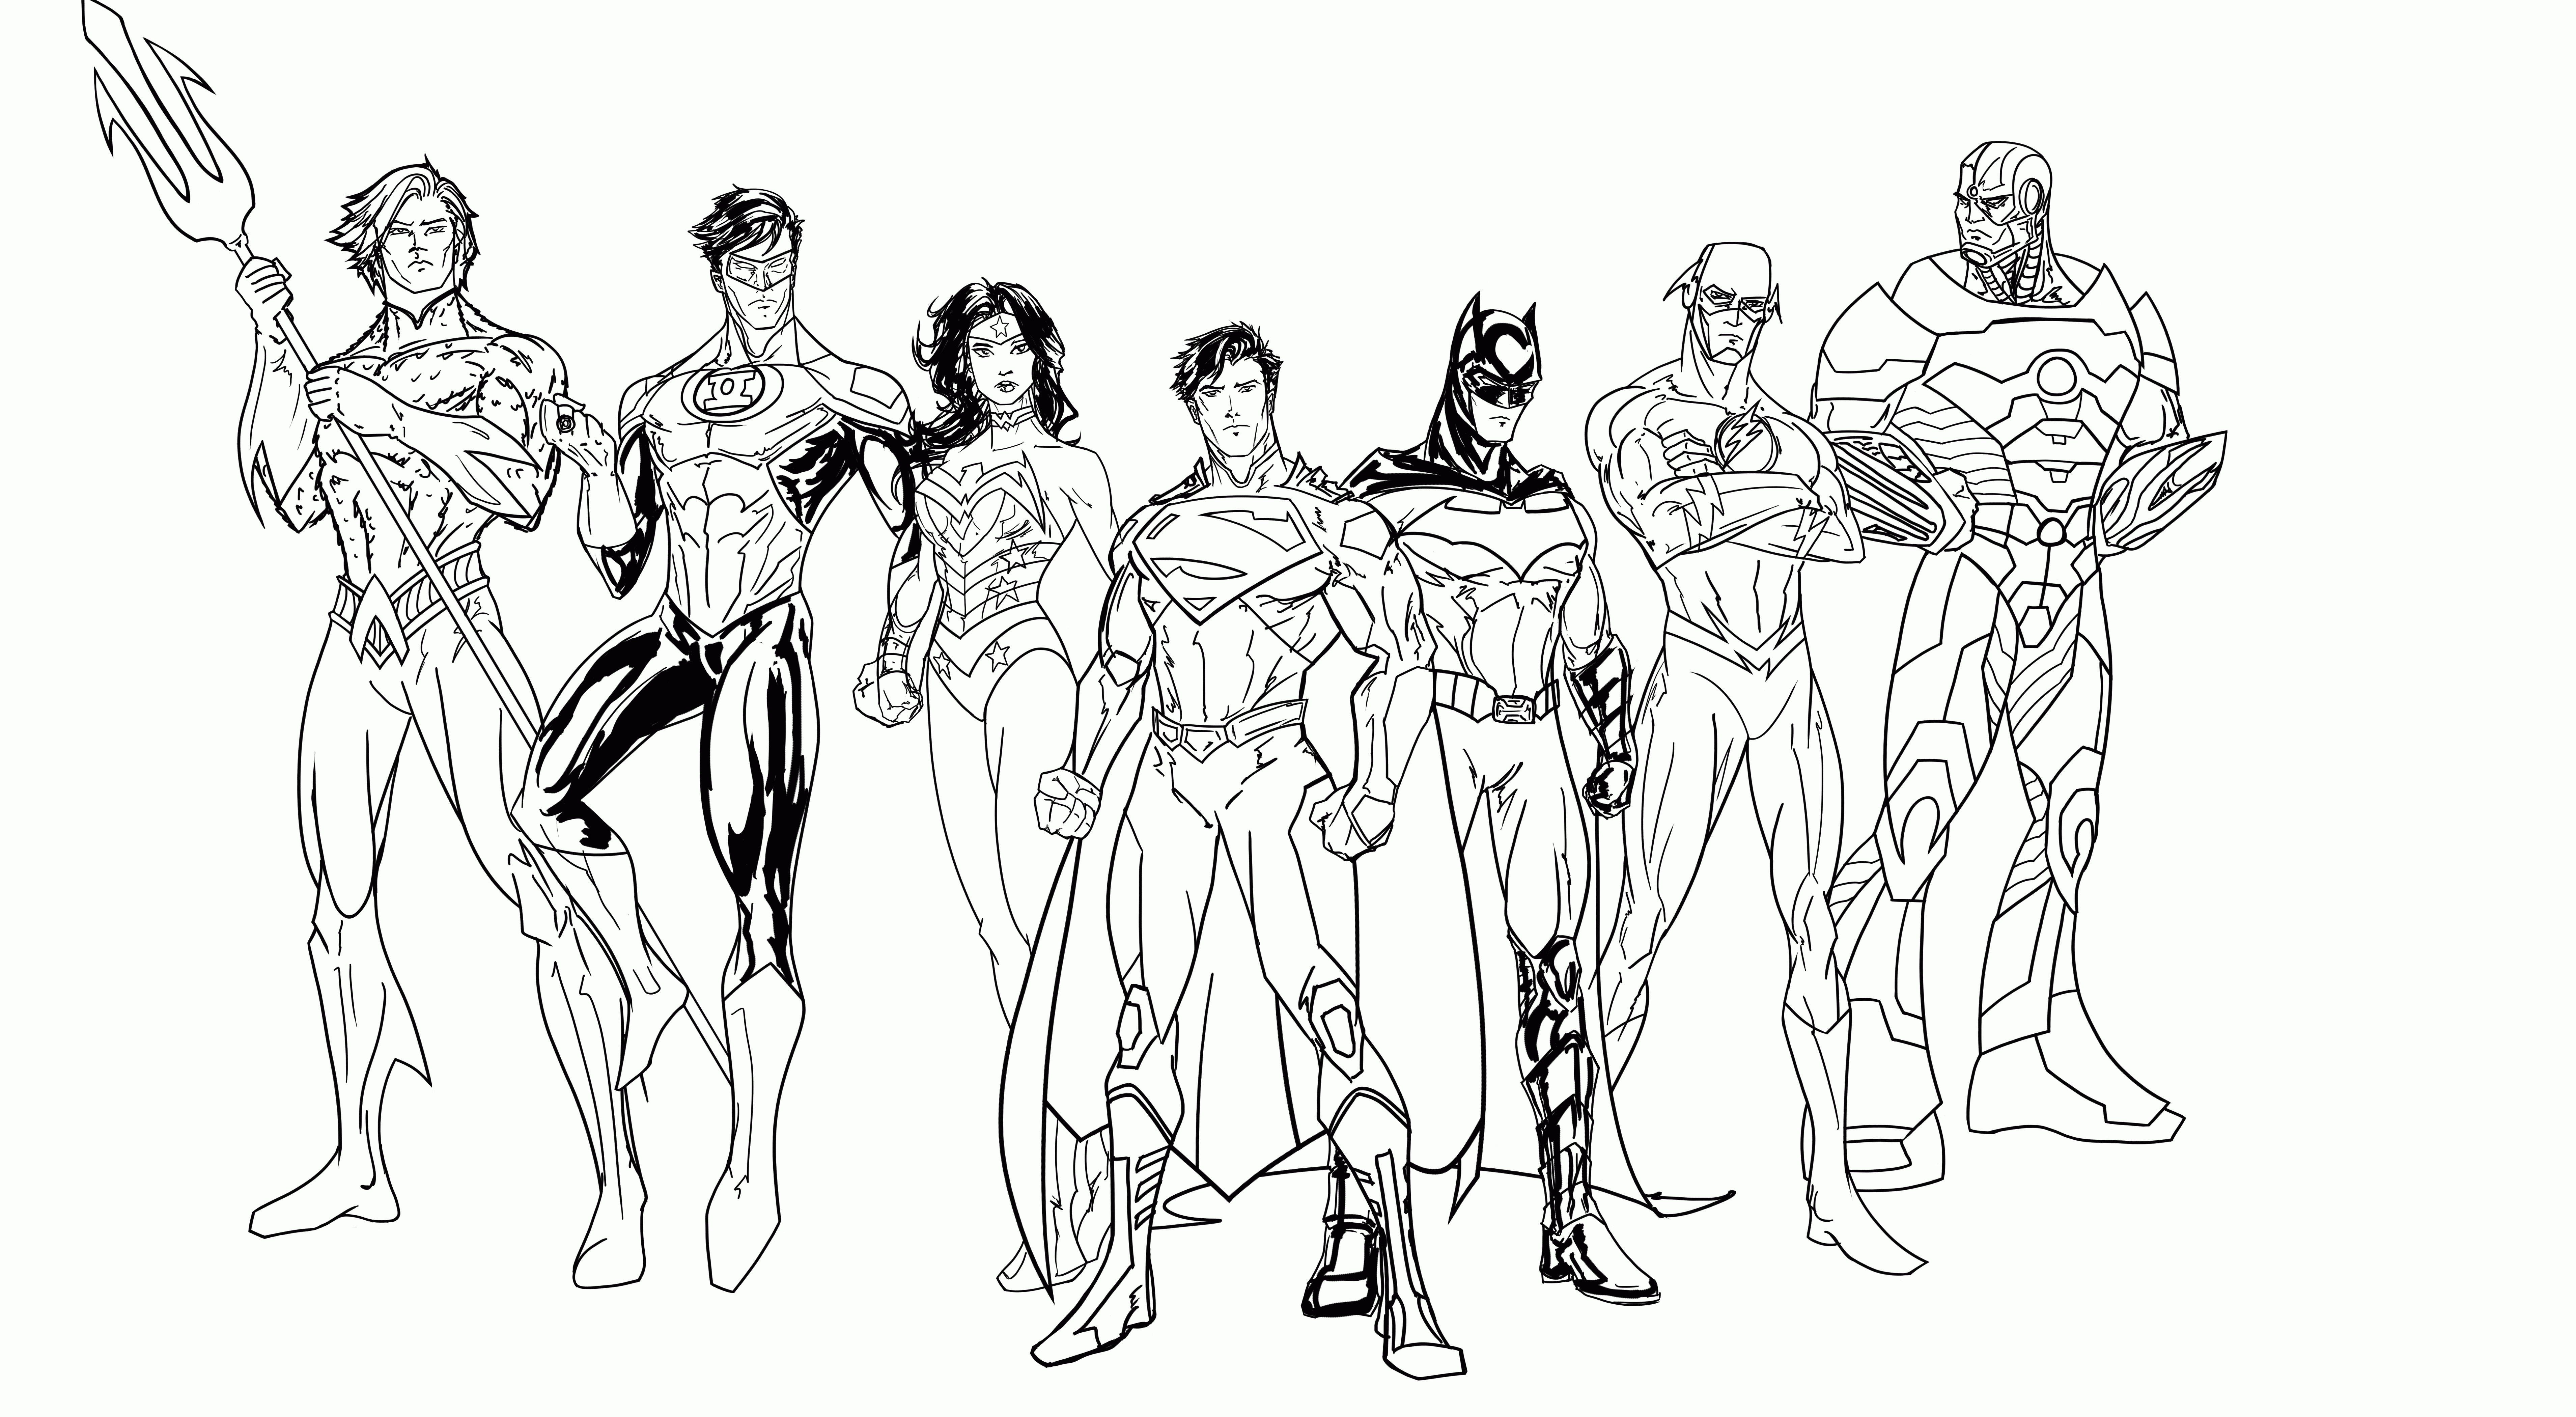 Justice League Coloring Page - Coloring Pages for Kids and for Adults